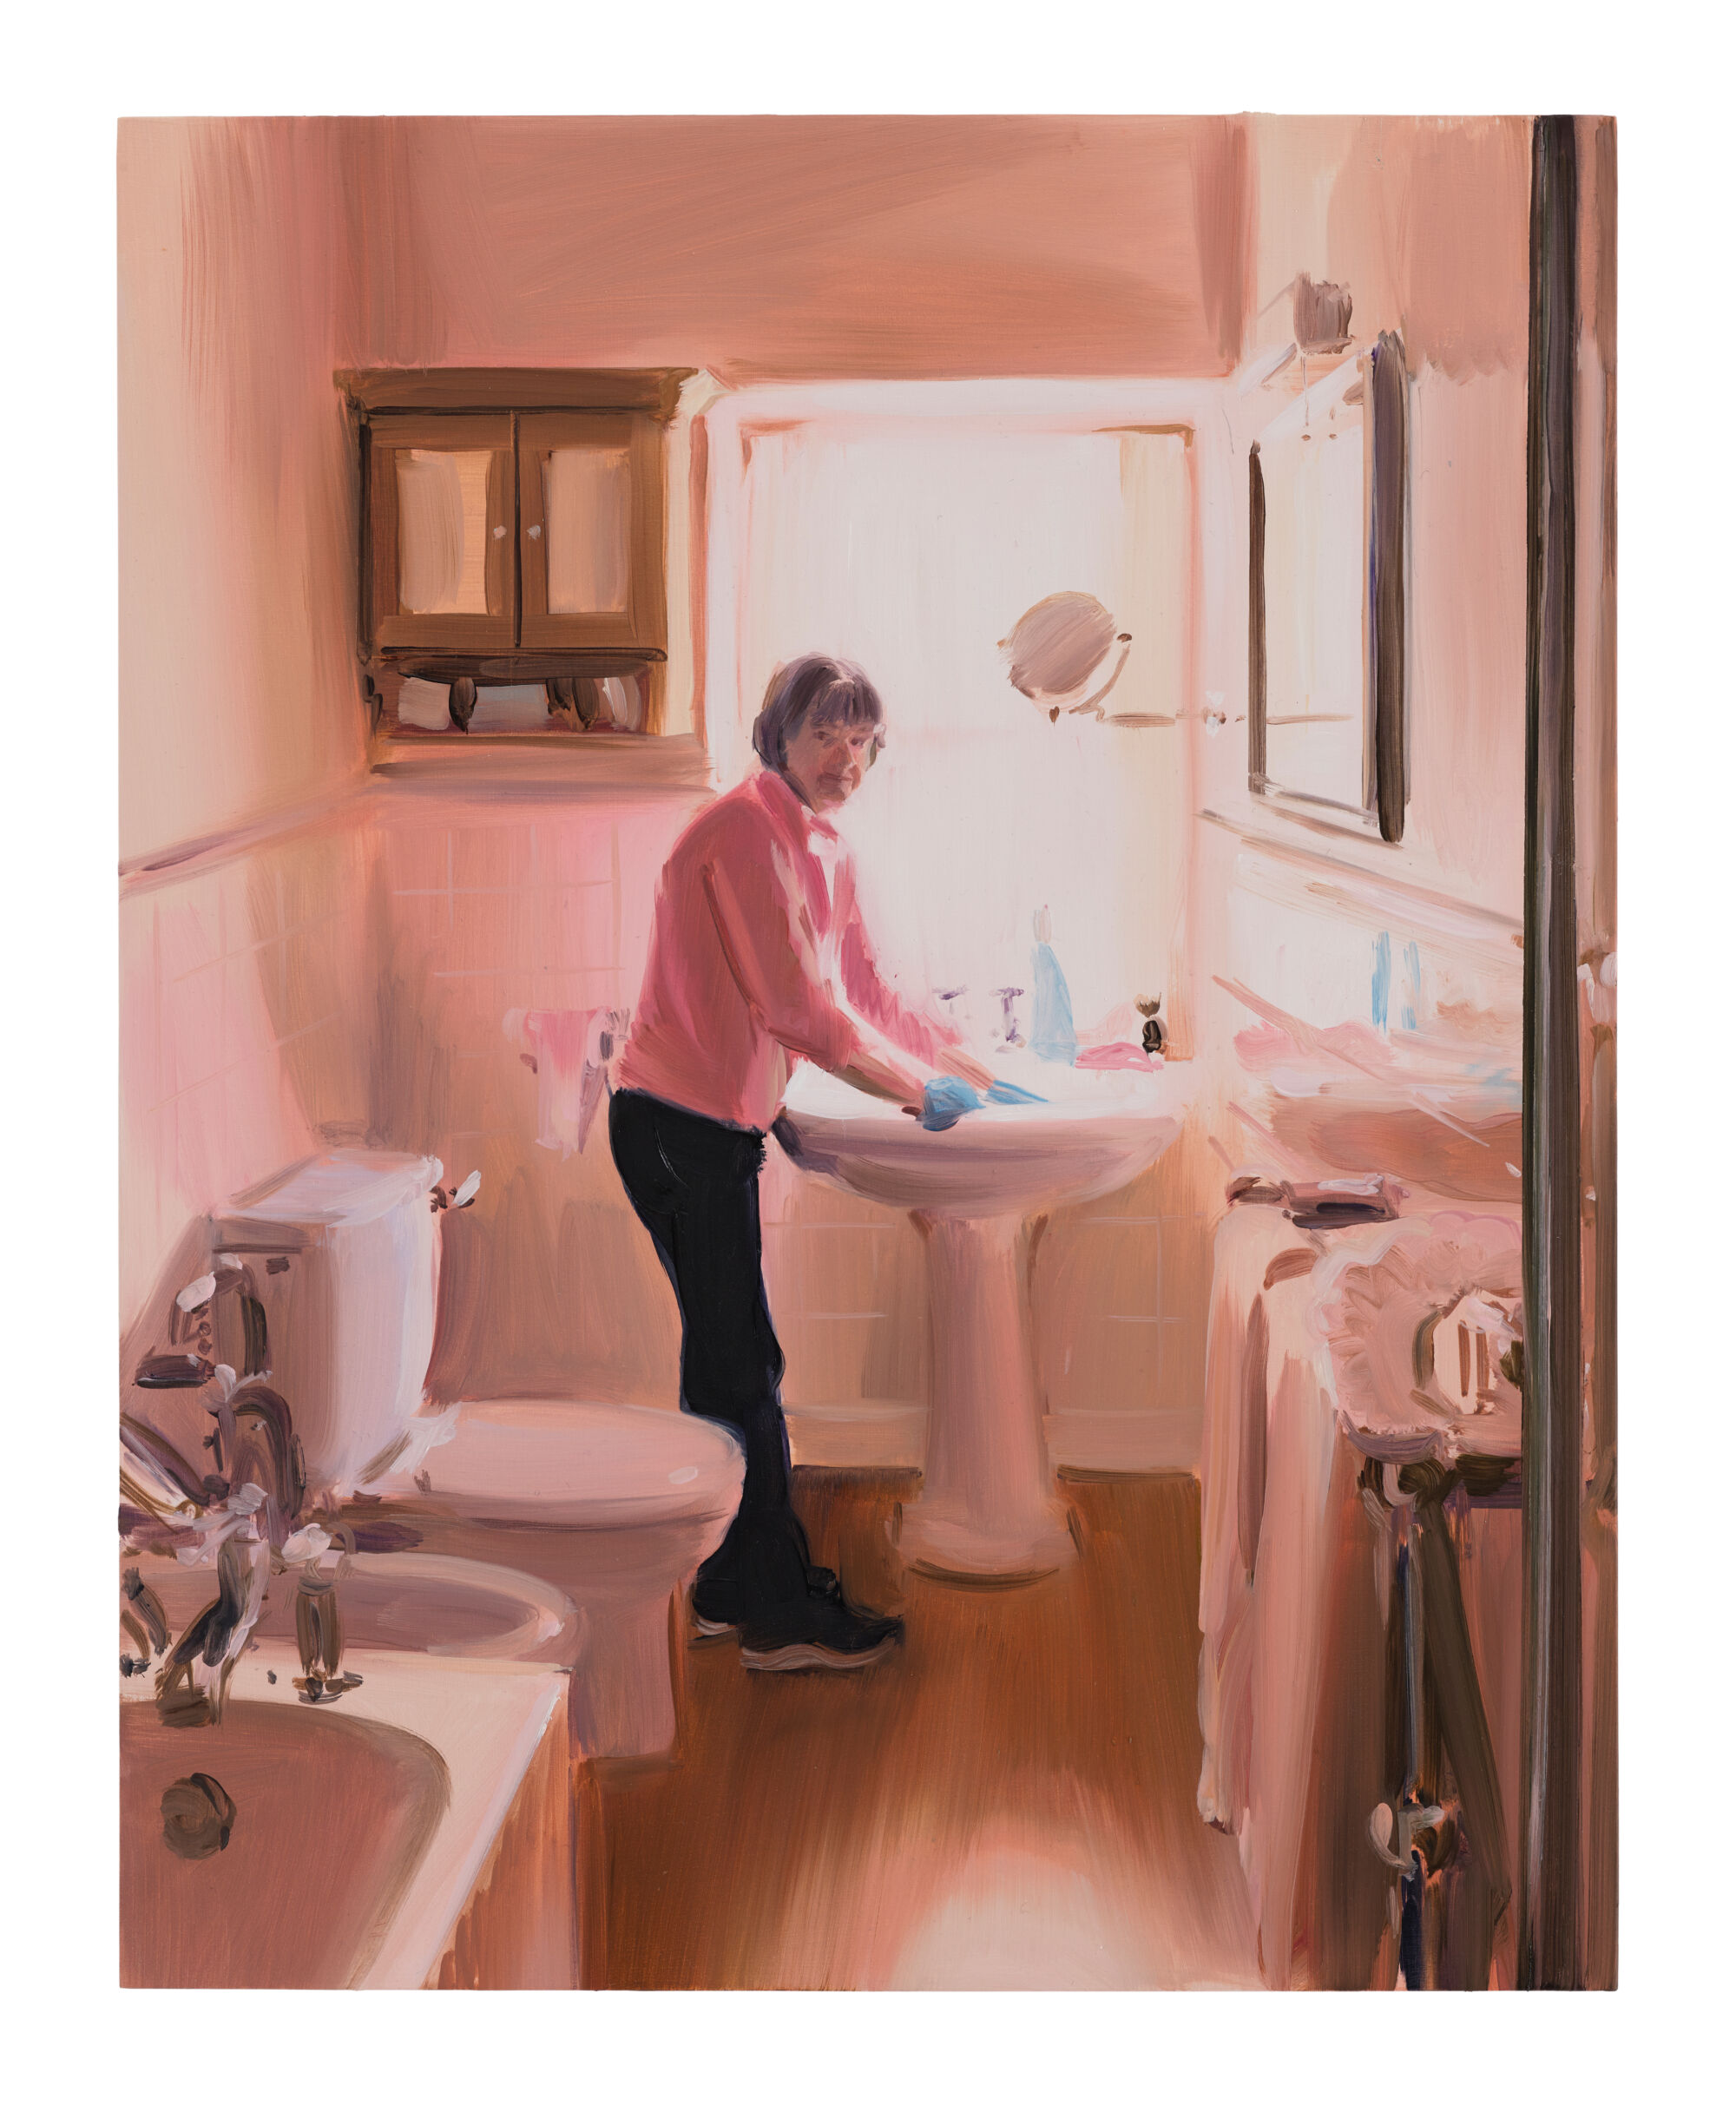 The Wick - Caroline Walker, 'Bathroom Sink Cleaning, Mid Morning, March', 2019. Oil on board, 45 x 36cm
(17 3/4 x 14 1/8in). Copyright Caroline Walker. Courtesy the artist and Ingleby Gallery, Edinburgh. Photo by Peter Mallet.